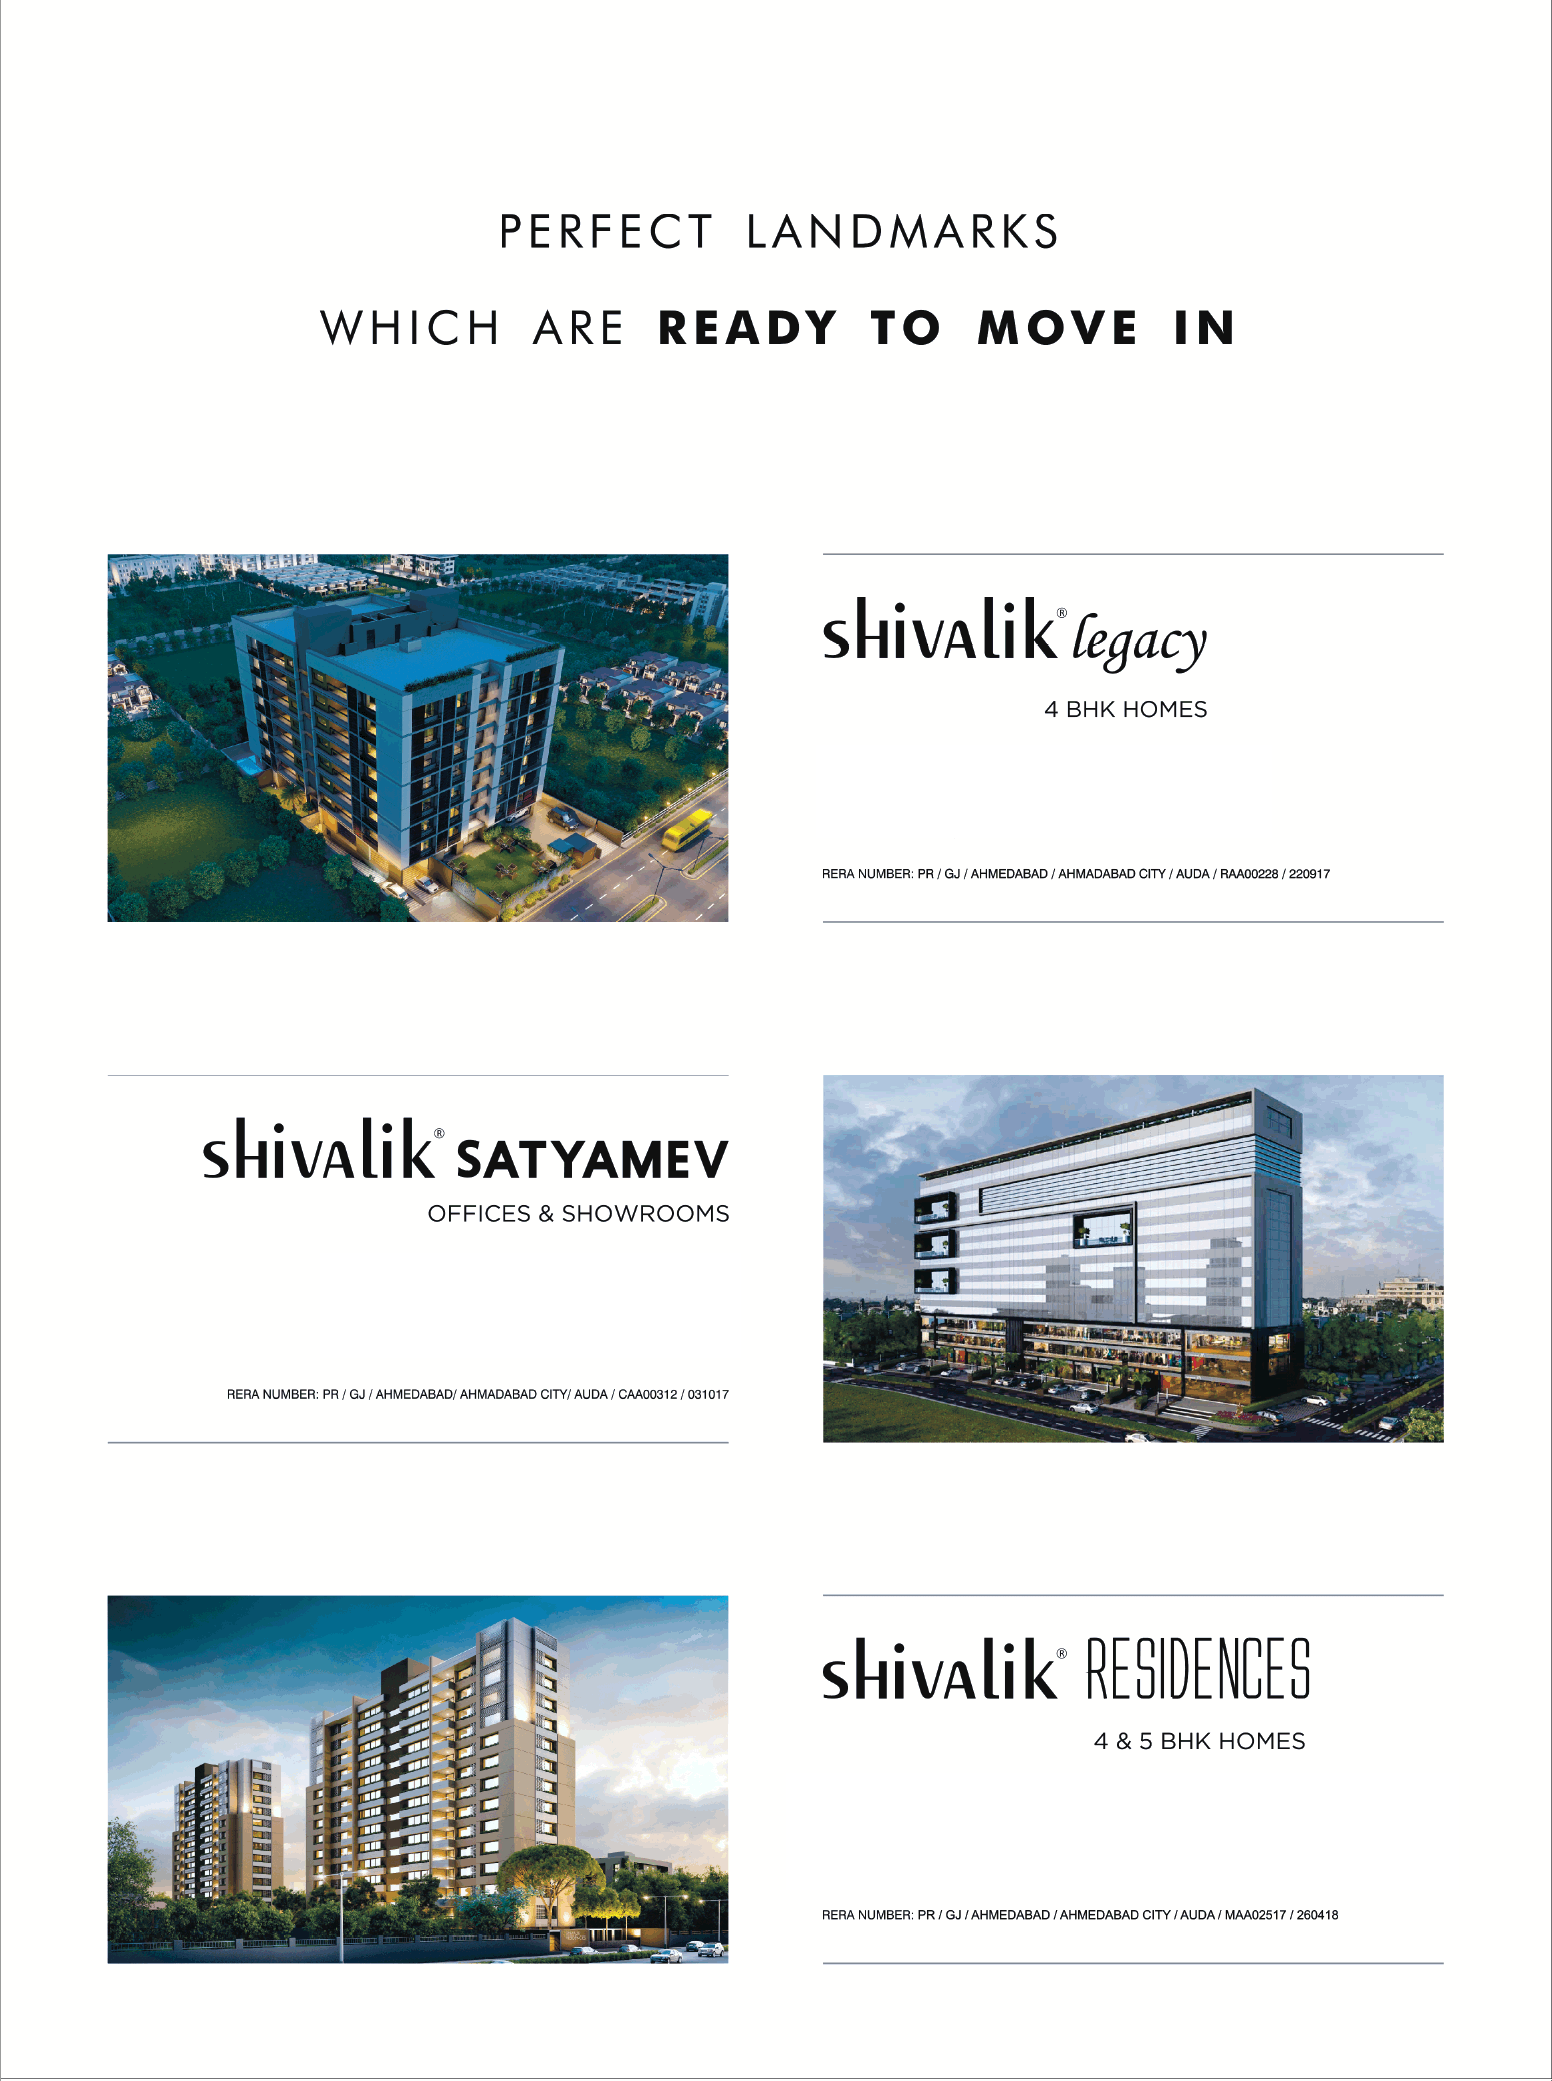 Ready to move in homes & offices at Shivalik Projects in Ahmedabad Update